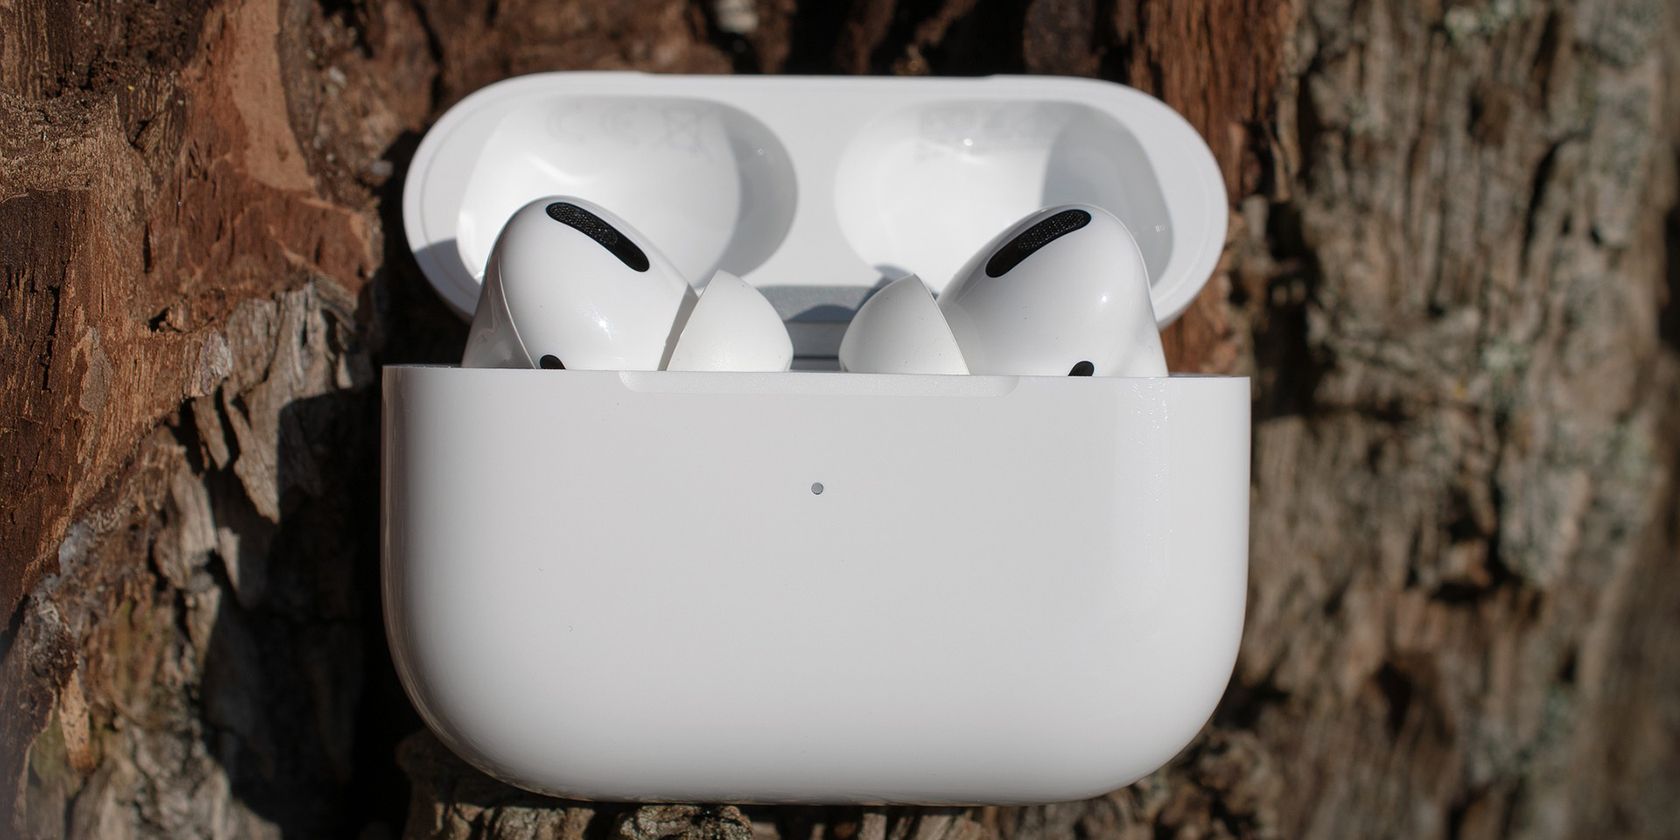 AirPods Microphone Not Working? Here Are 11 Fixes to Try